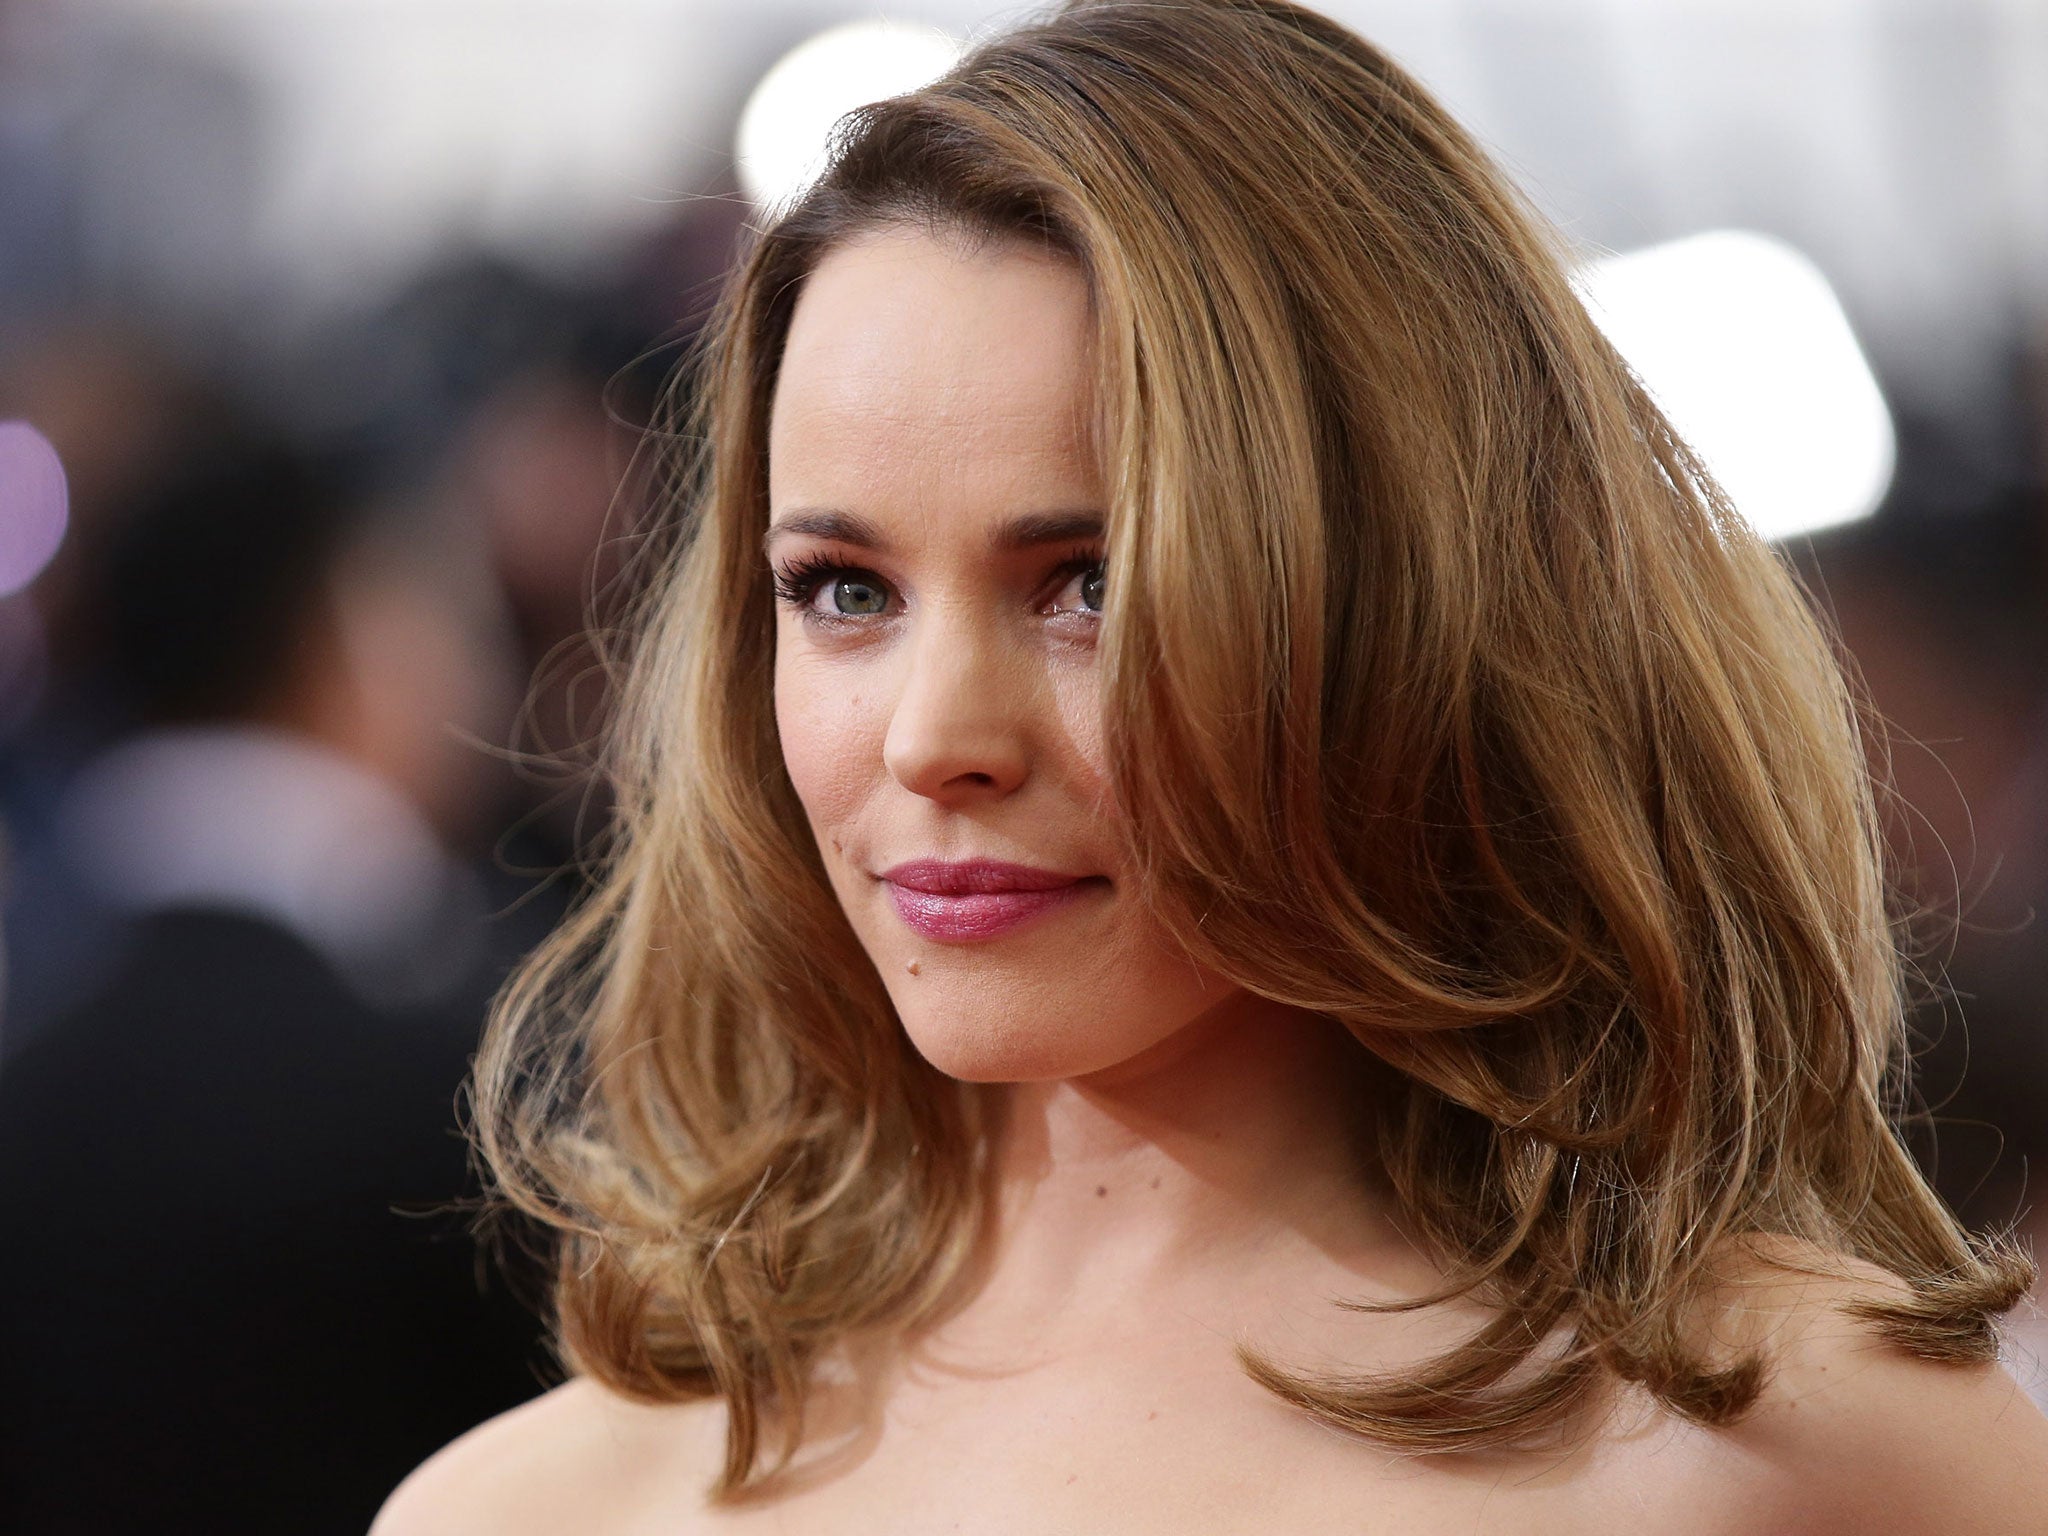 Rachel McAdams will star in Doctor Strange in a yet to be announced role